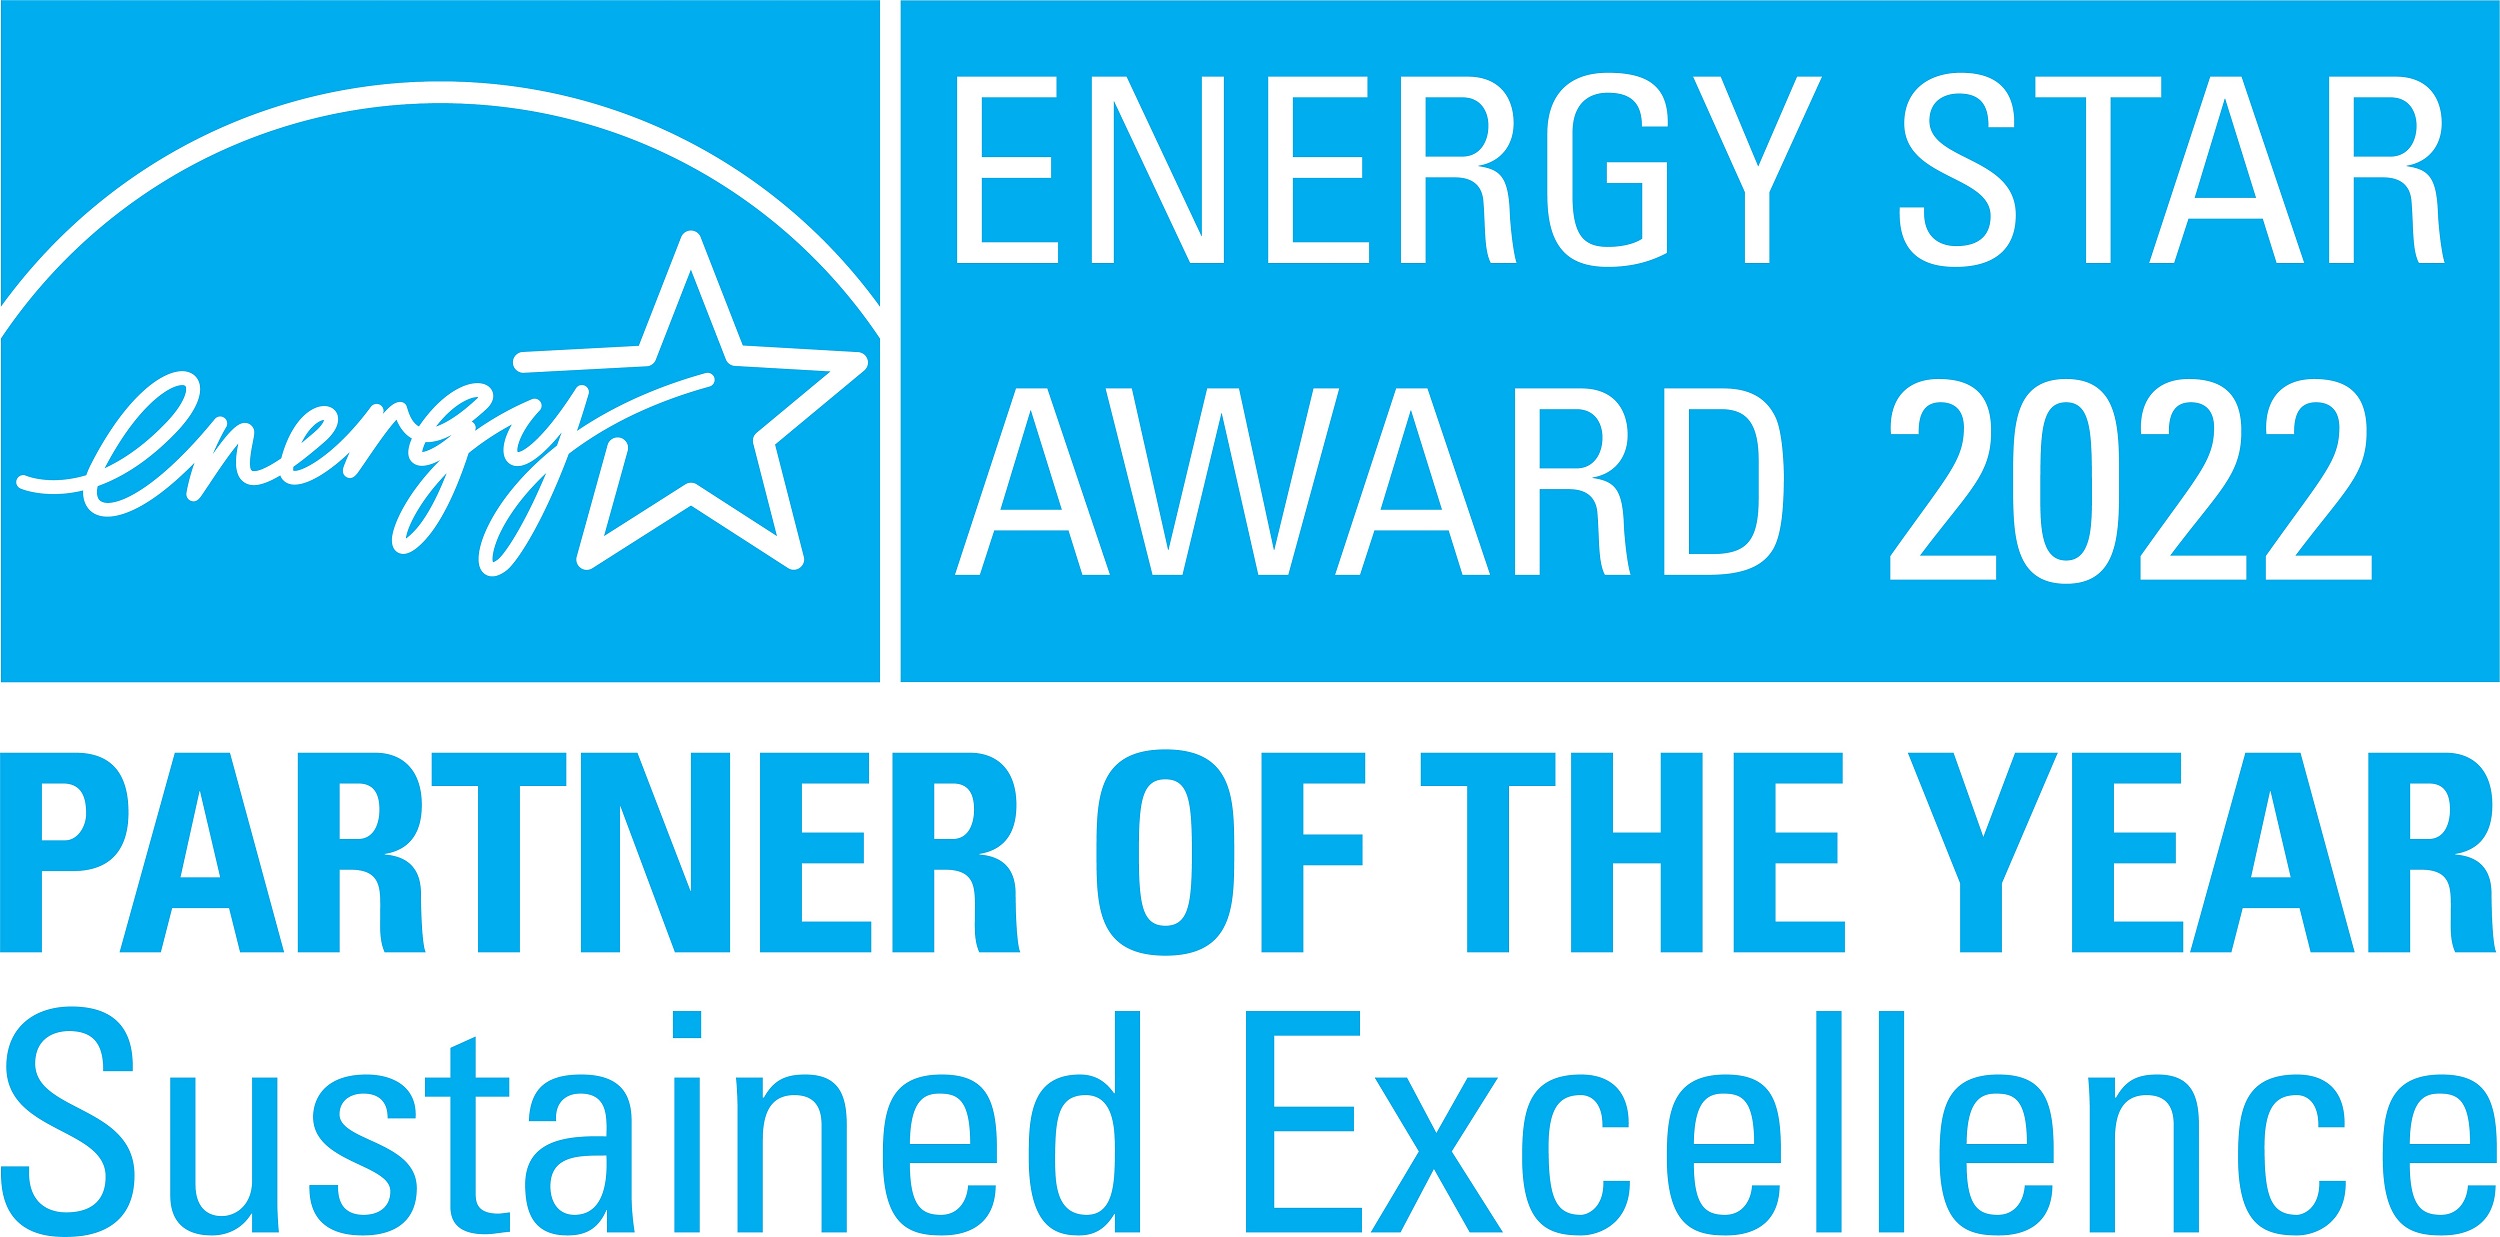 Awarded 11th consecutive Energy Star Partner of the Year